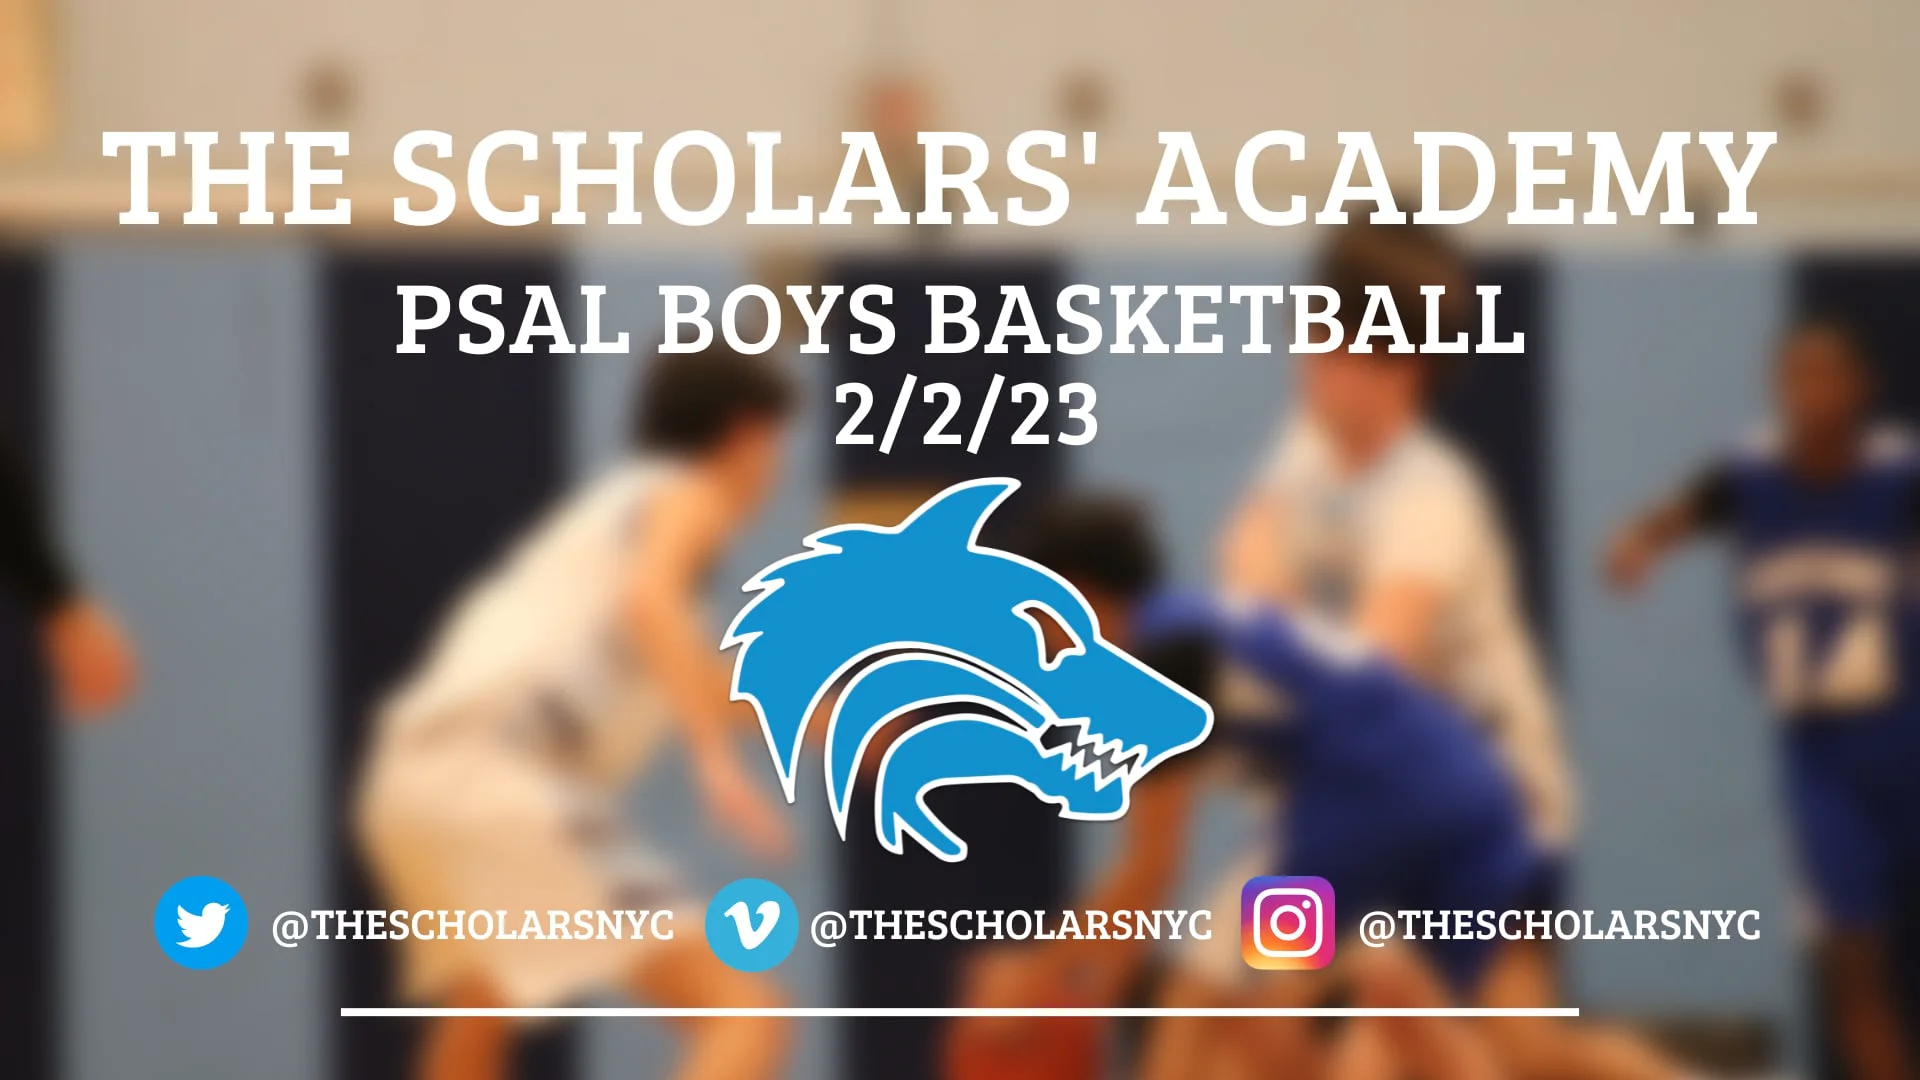 SCHOLARS ACADEMY SEAWOLVER Black White and Blue Basketball